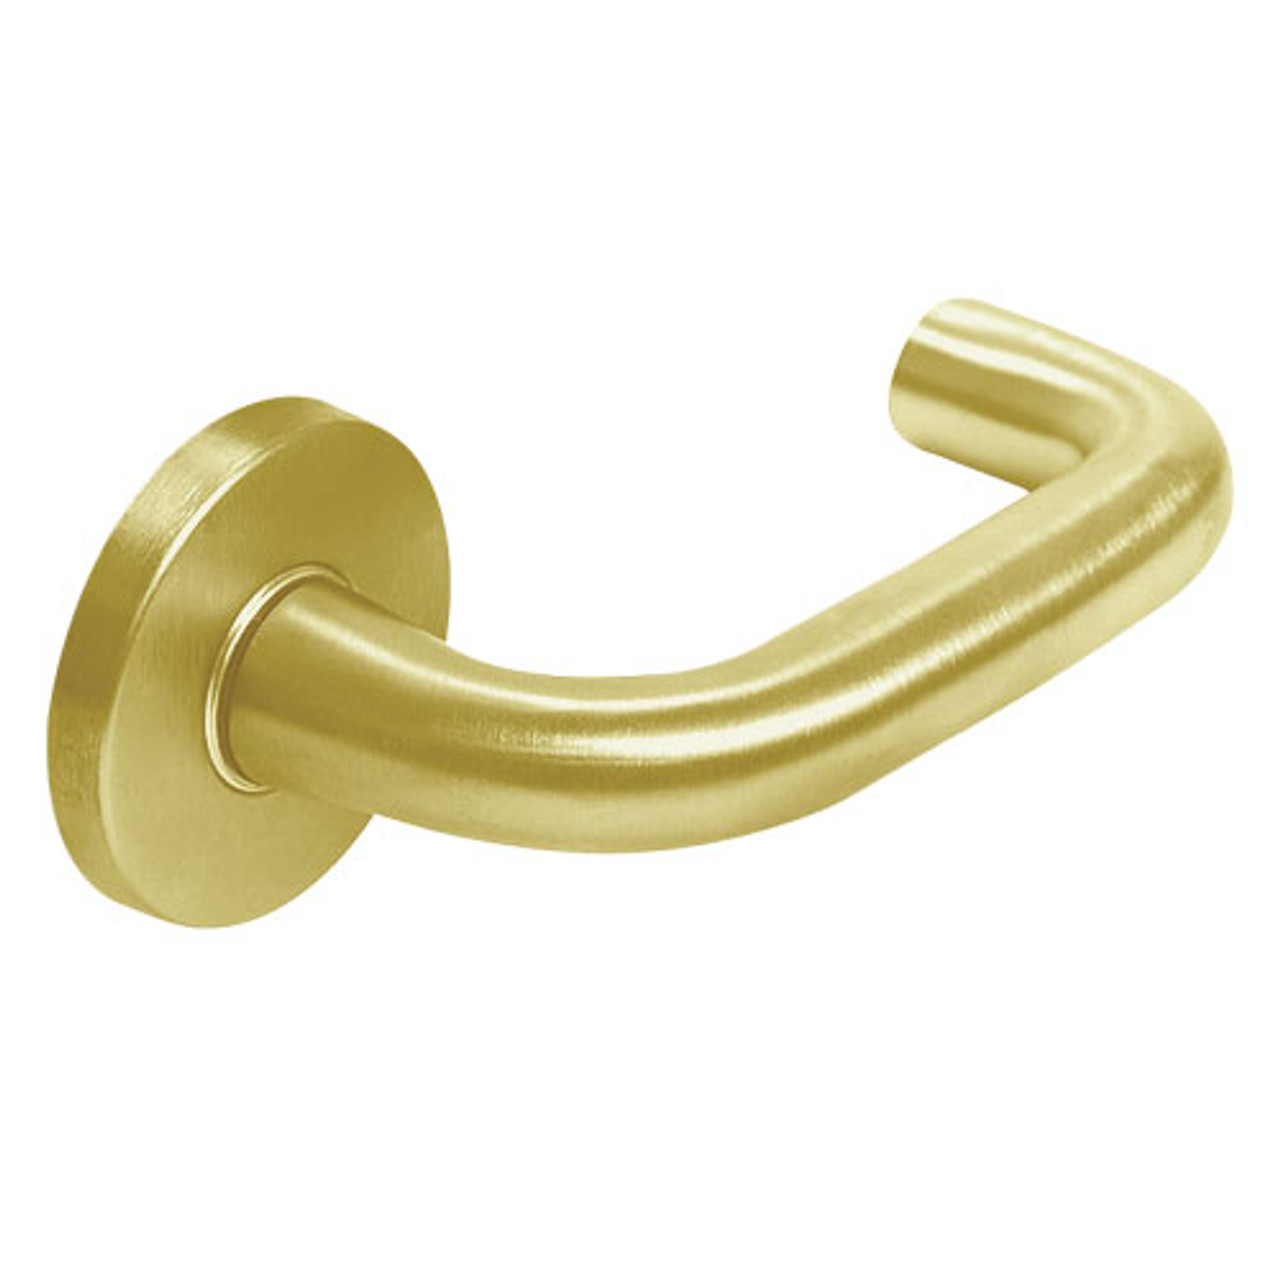 ML2053-LWB-606-M31 Corbin Russwin ML2000 Series Mortise Entrance Trim Pack with Lustra Lever in Satin Brass